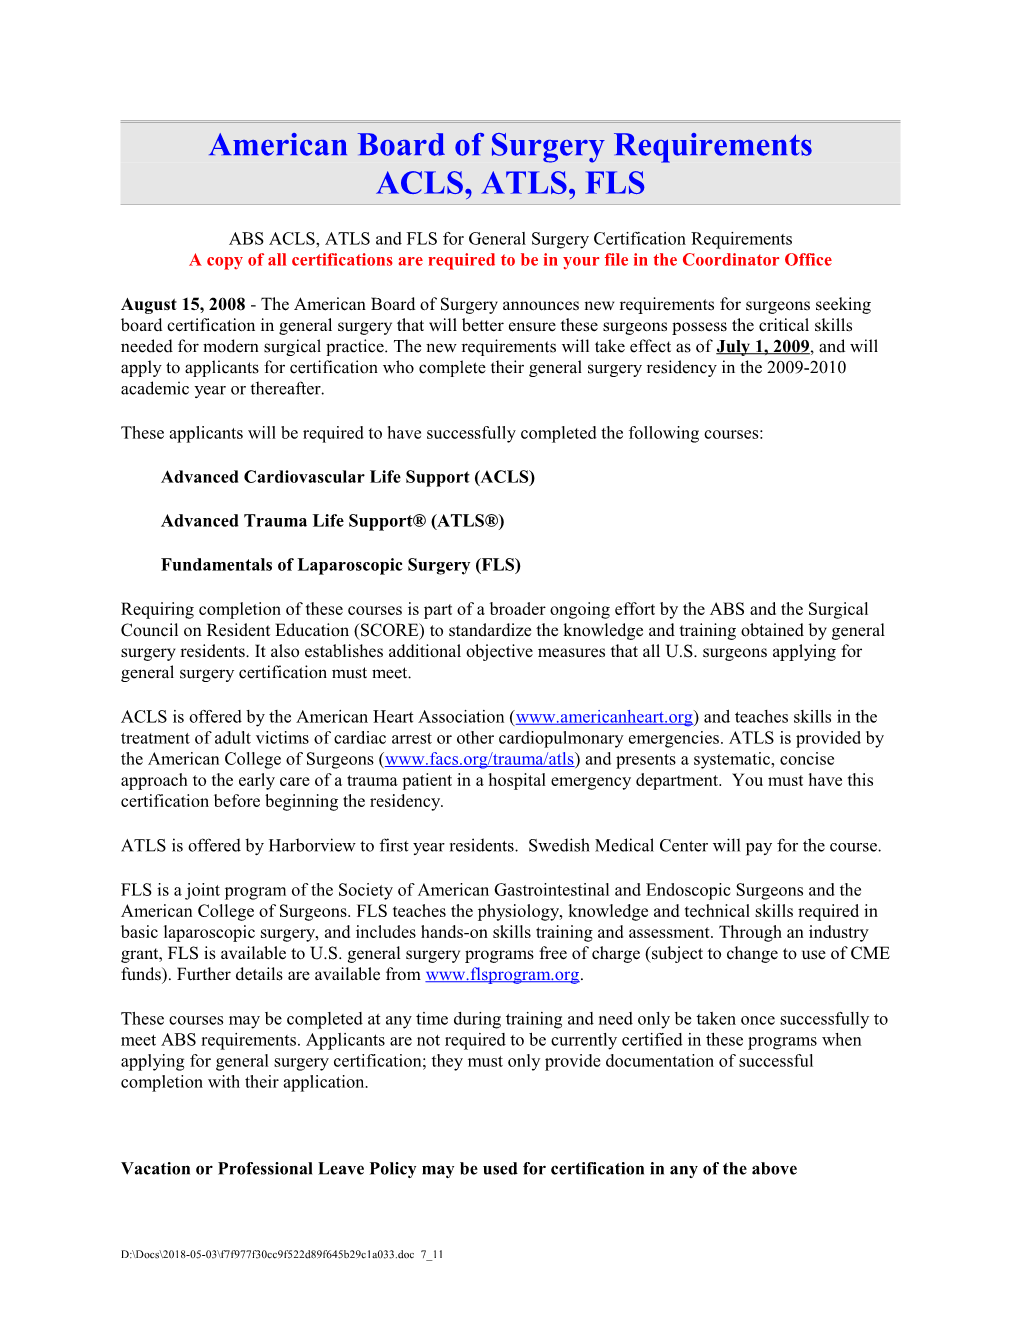 ABS ACLS, ATLS and FLS for General Surgery Certification Requirements